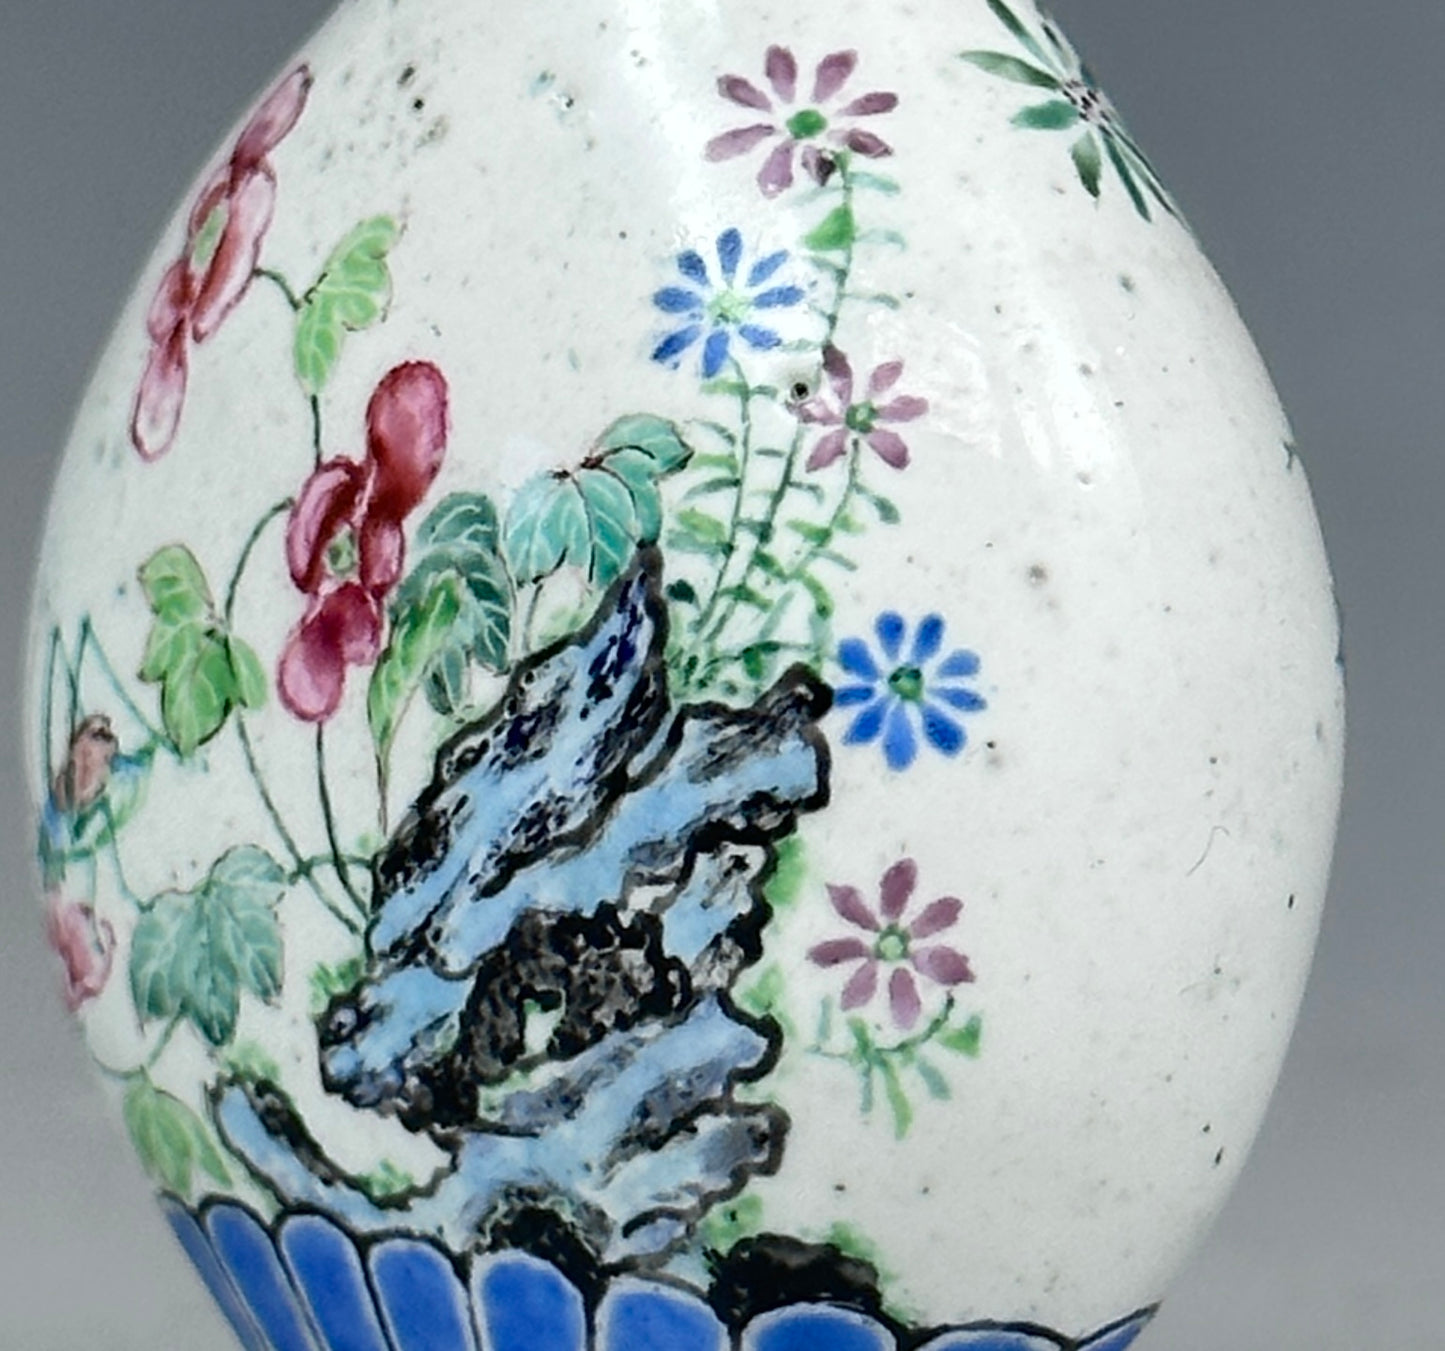 SOLD Antique Chinese Canton Enamel Cricket Snuff Bottle Qianlong Mark and Period V&A Museum 18th century